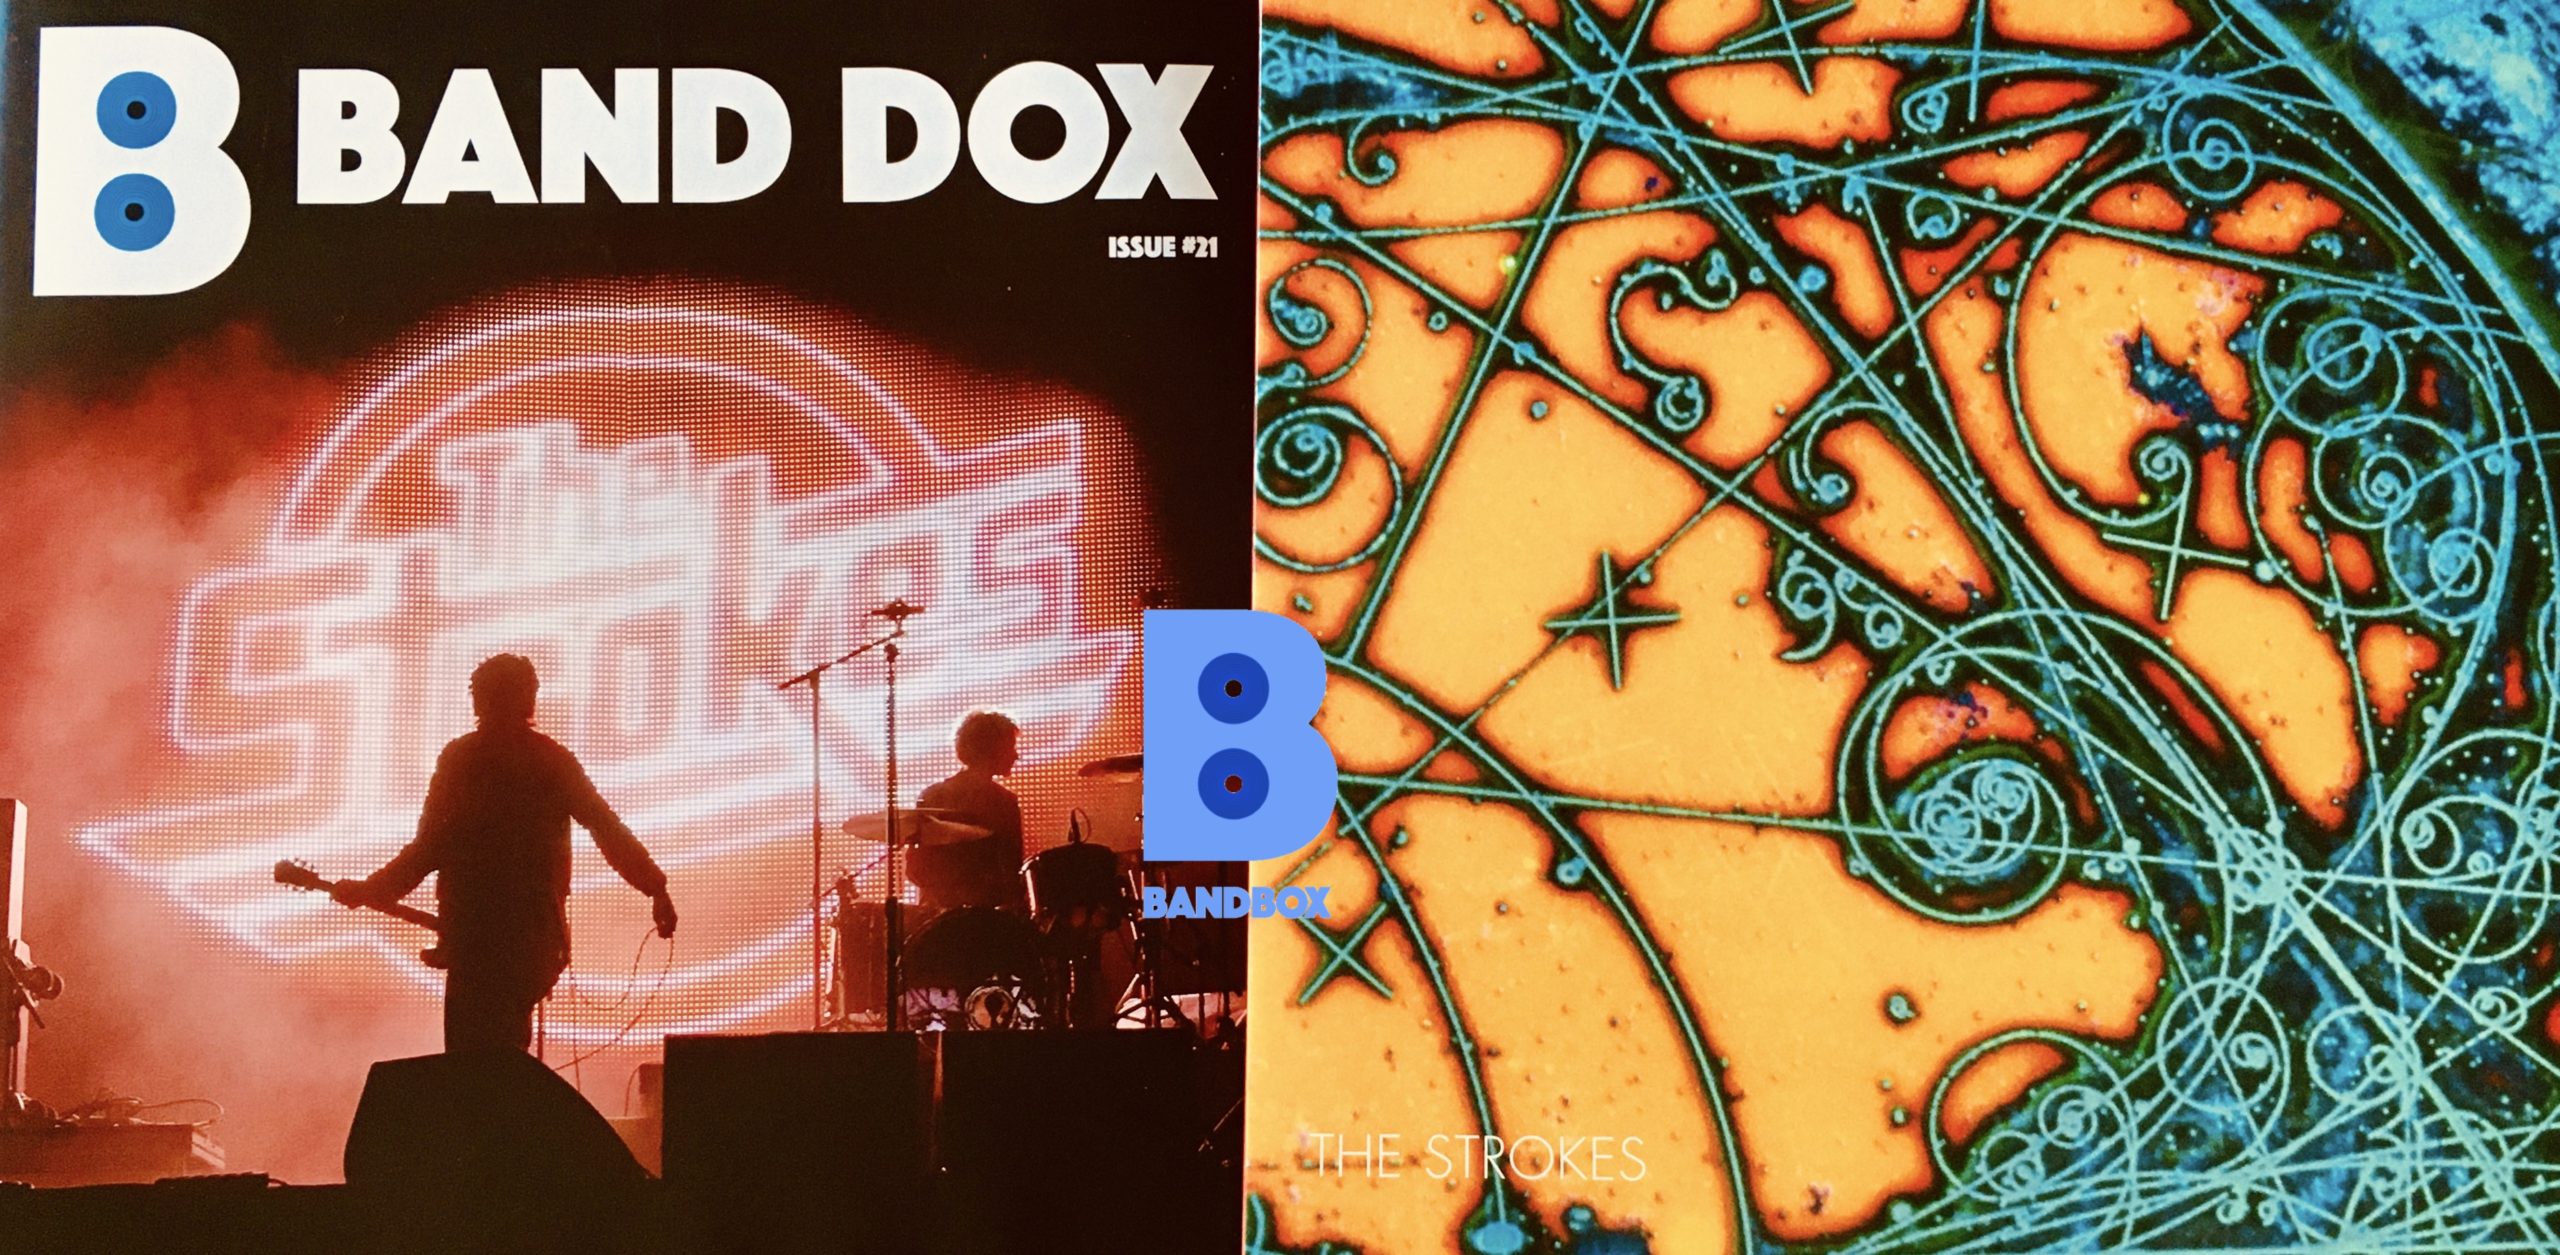 Geek insider, geekinsider, geekinsider. Com,, bandbox unboxed vol. 14 - the strokes, entertainment